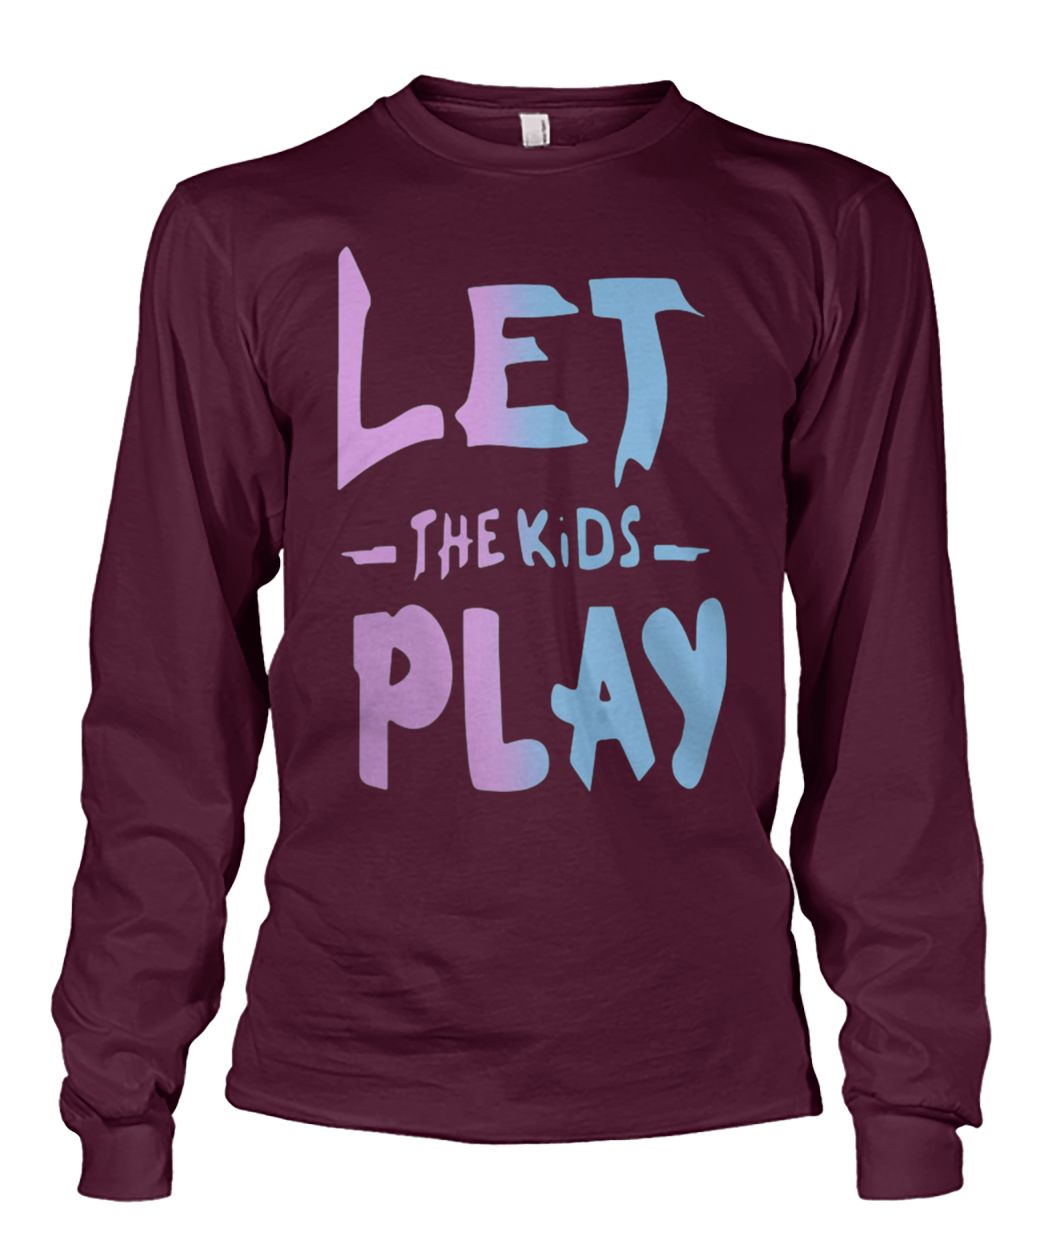 Let the kids play unisex long sleeve